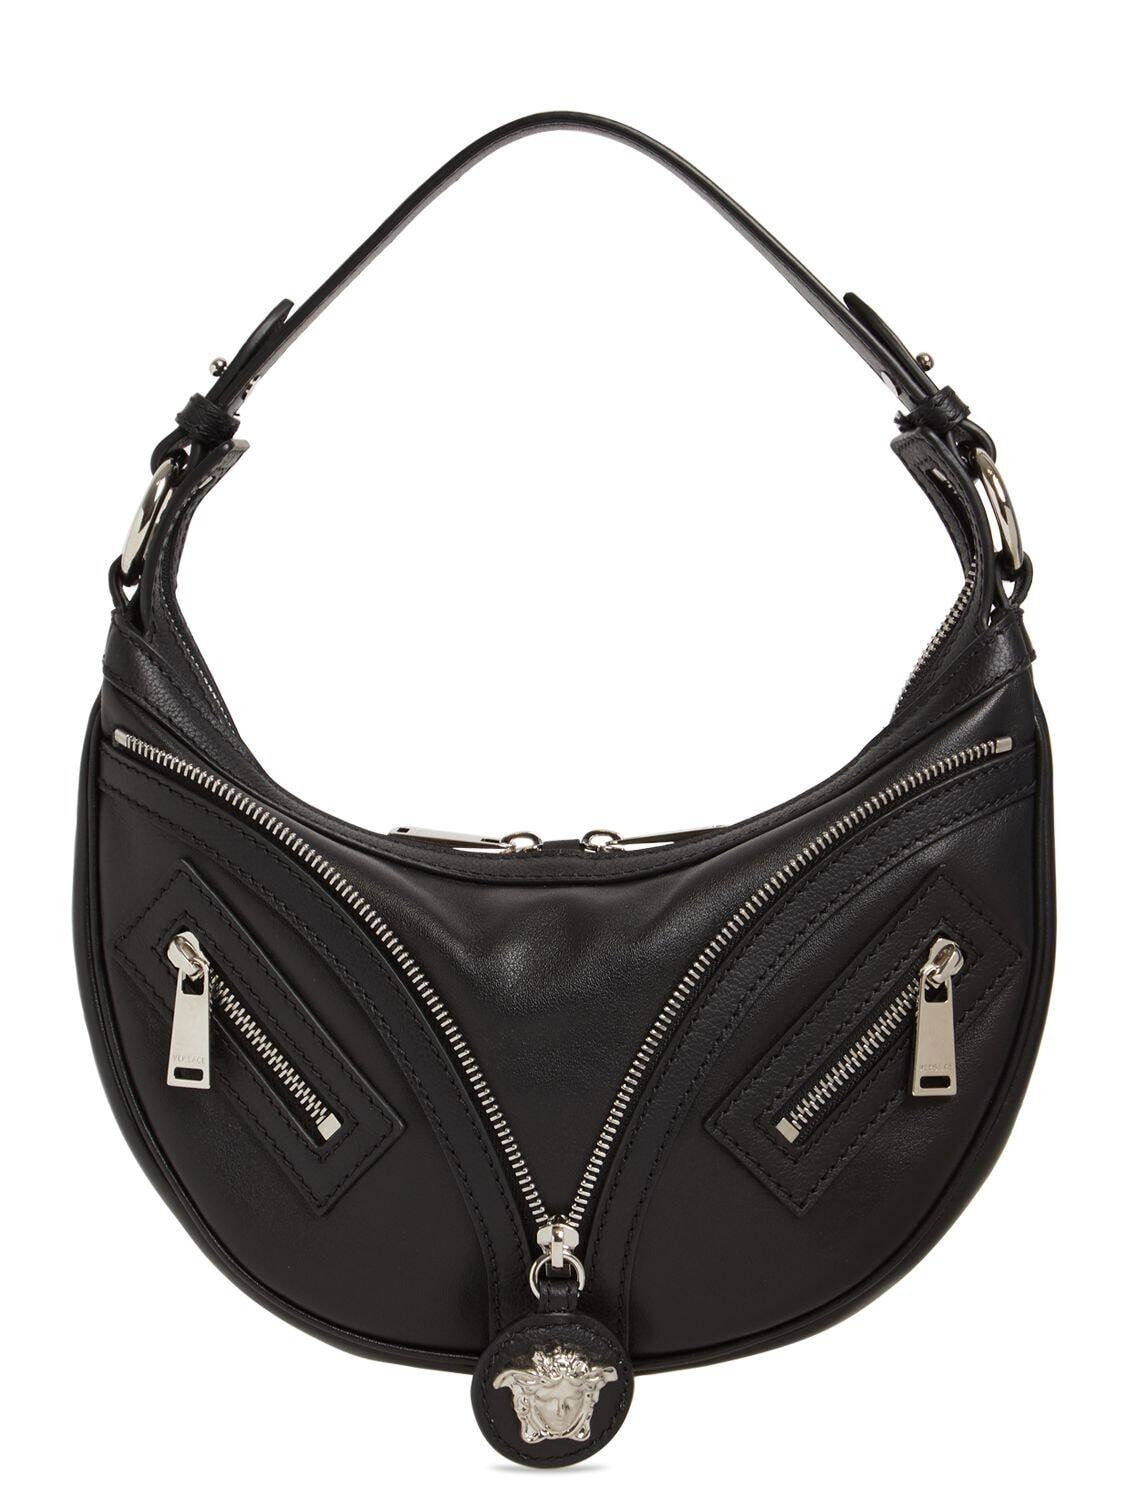 VERSACE Small Smooth Leather Top Handle Bag in black